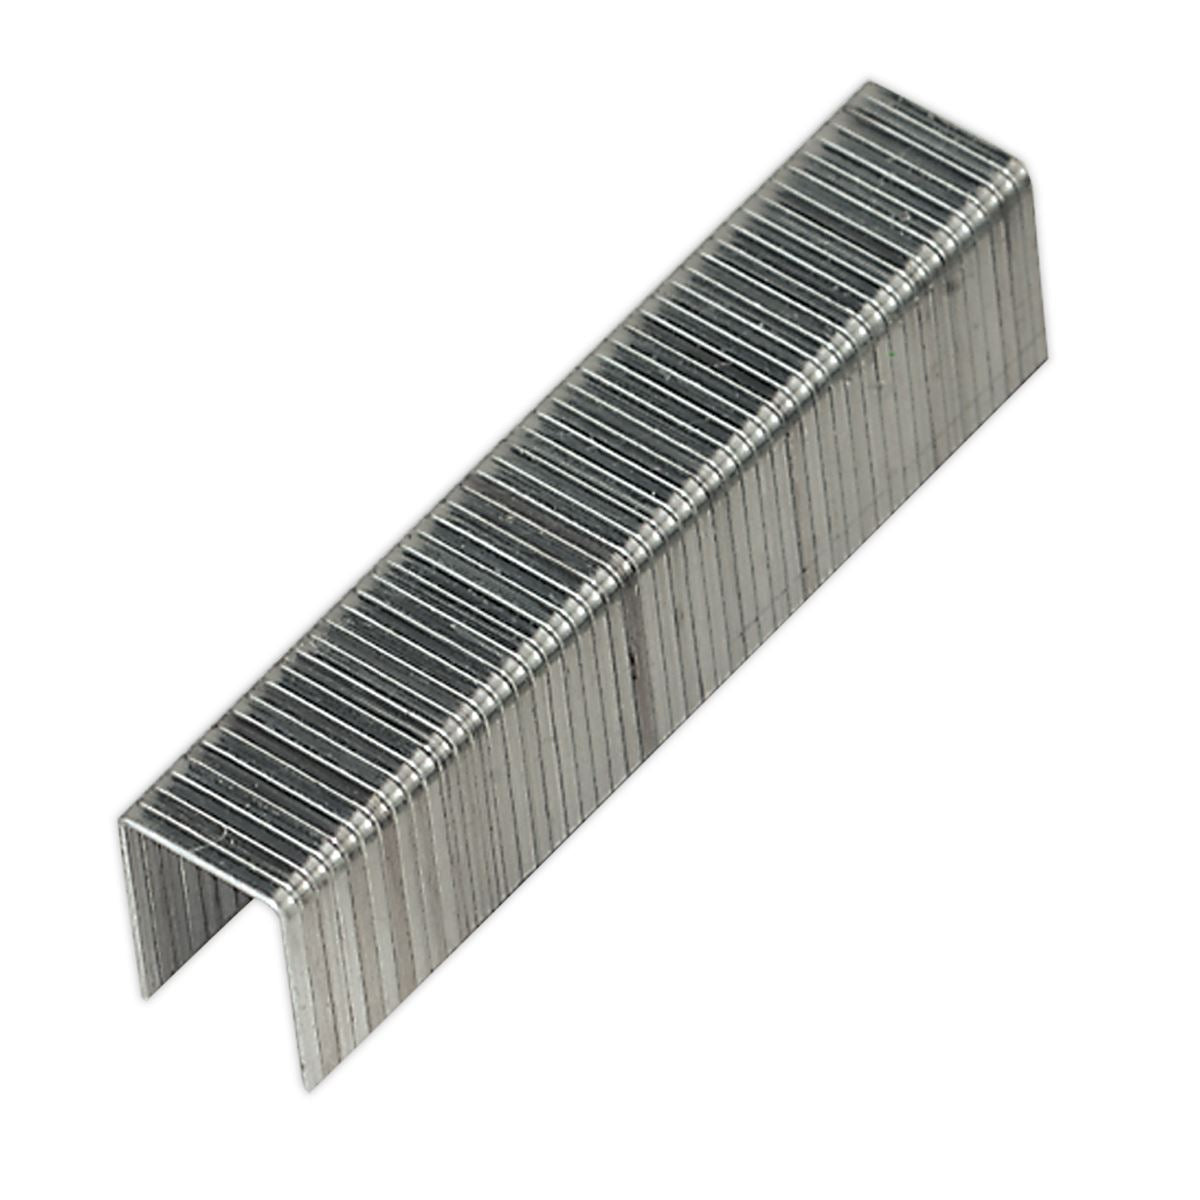 Sealey Staples 12mm - Pack of 500